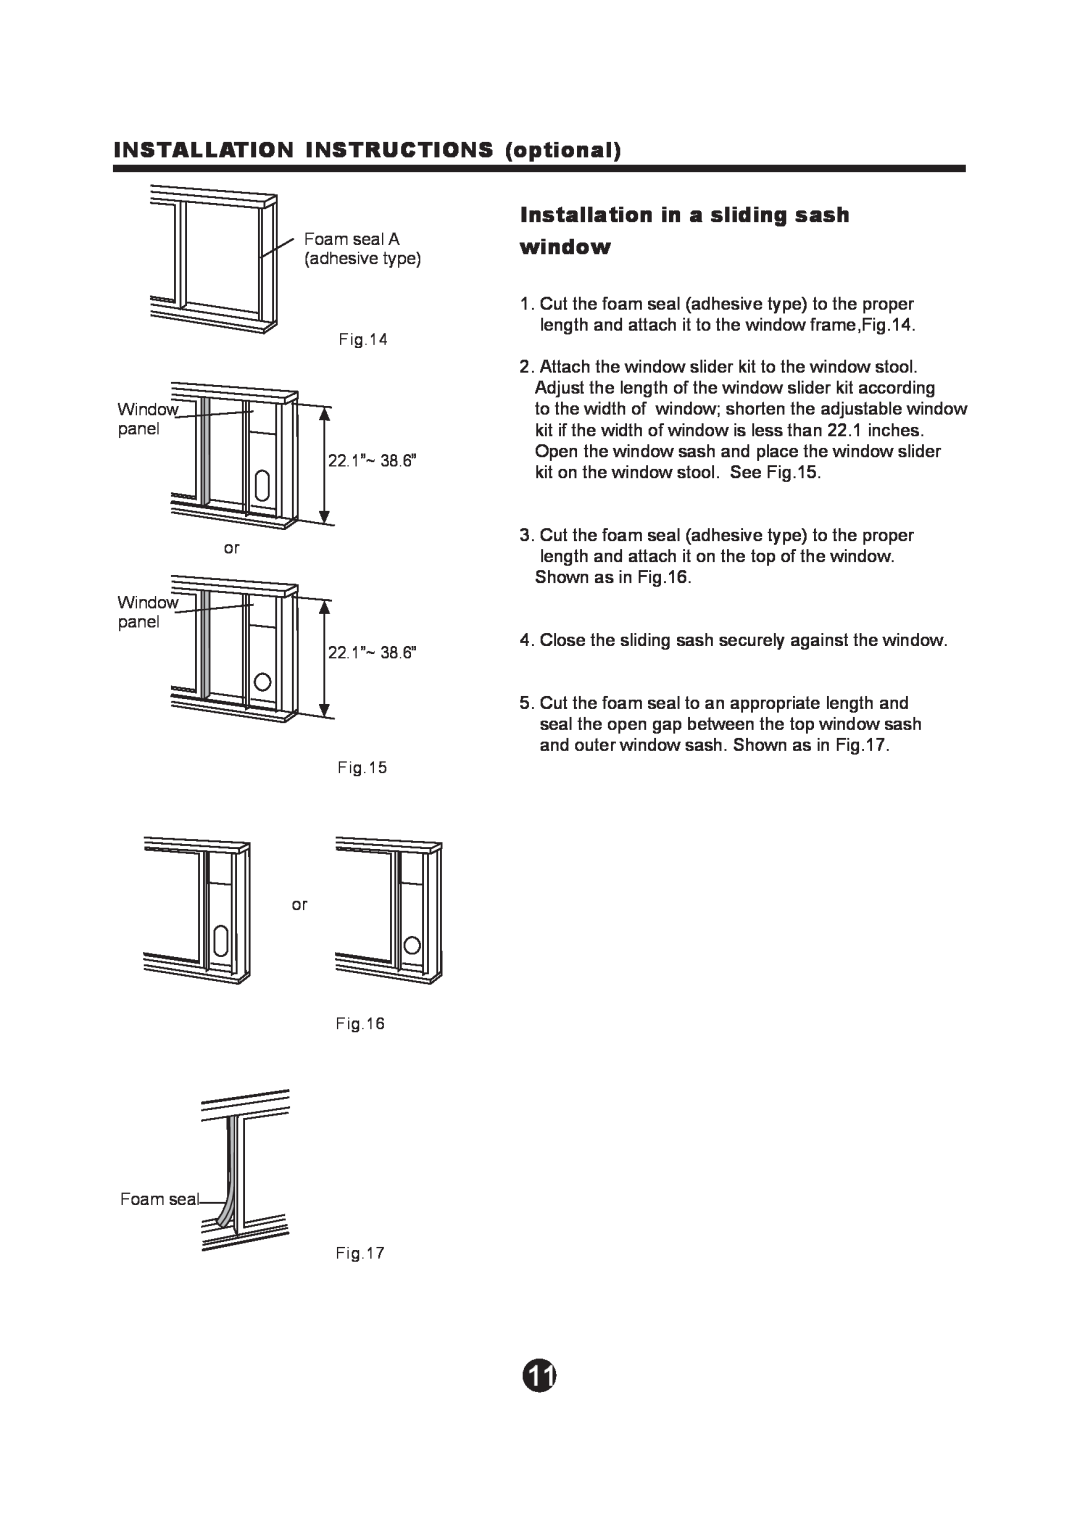 NewAir AC-12100E owner manual INSTALLATION INSTRUCTIONS optional, Installation in a sliding sash window 